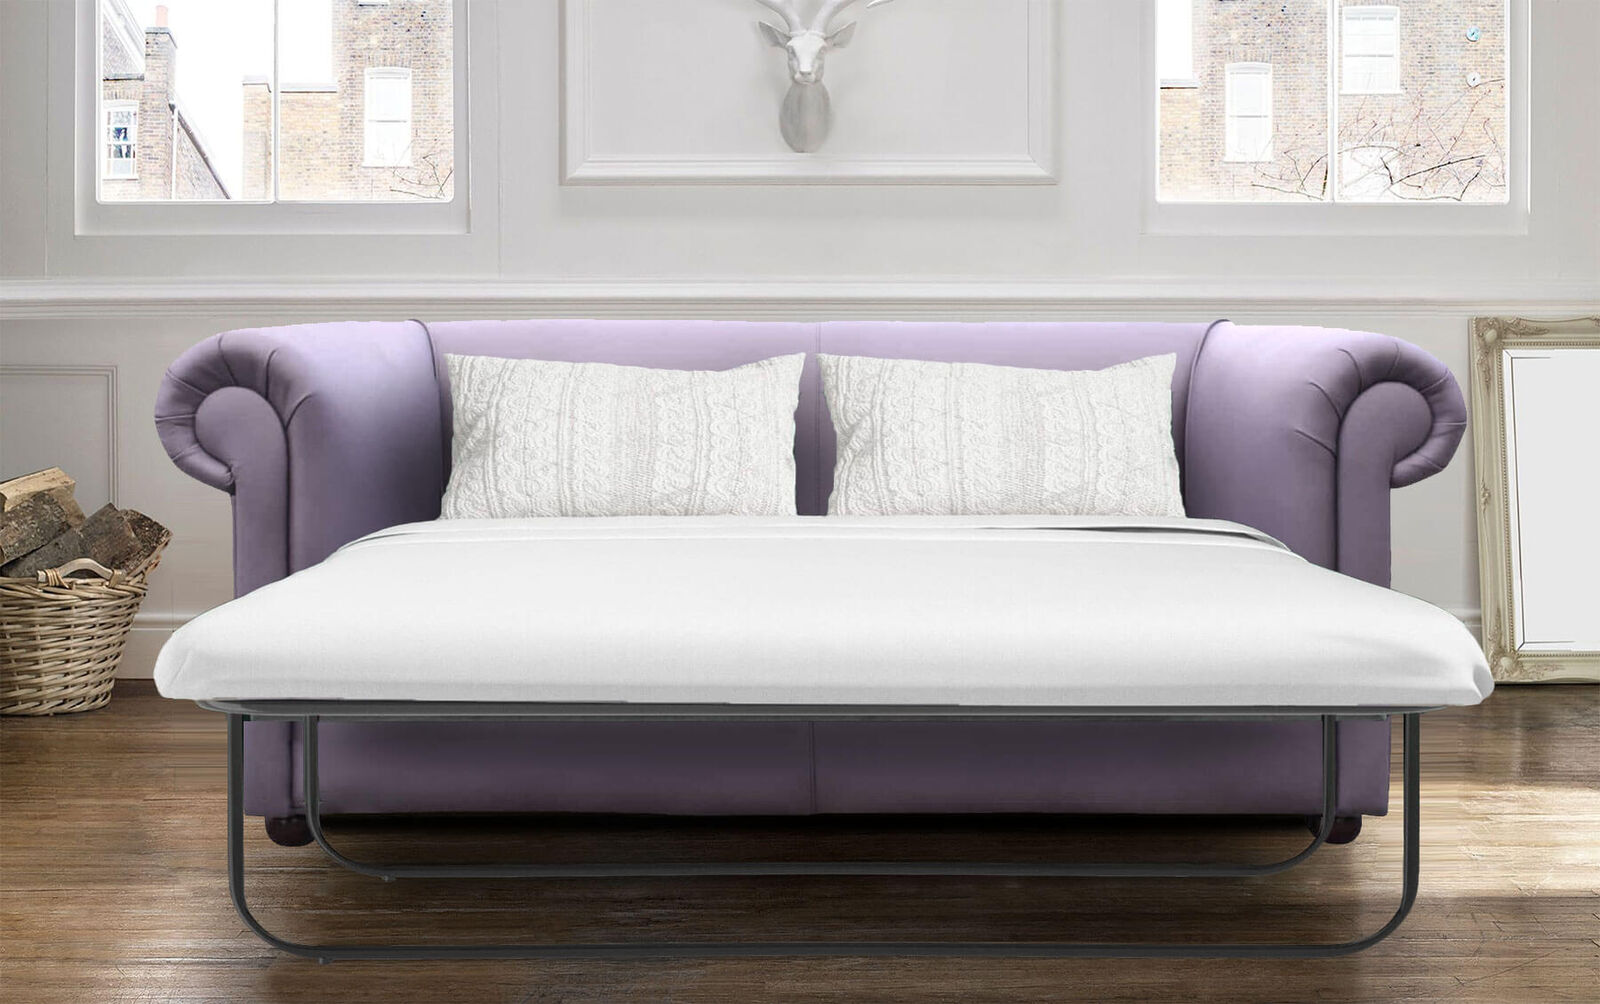 Product photograph of Chesterfield 1930 039 S 3 Seater Sofa Bed Shelly Amethyst Purple Leather In Classic Style from Chesterfield Sofas